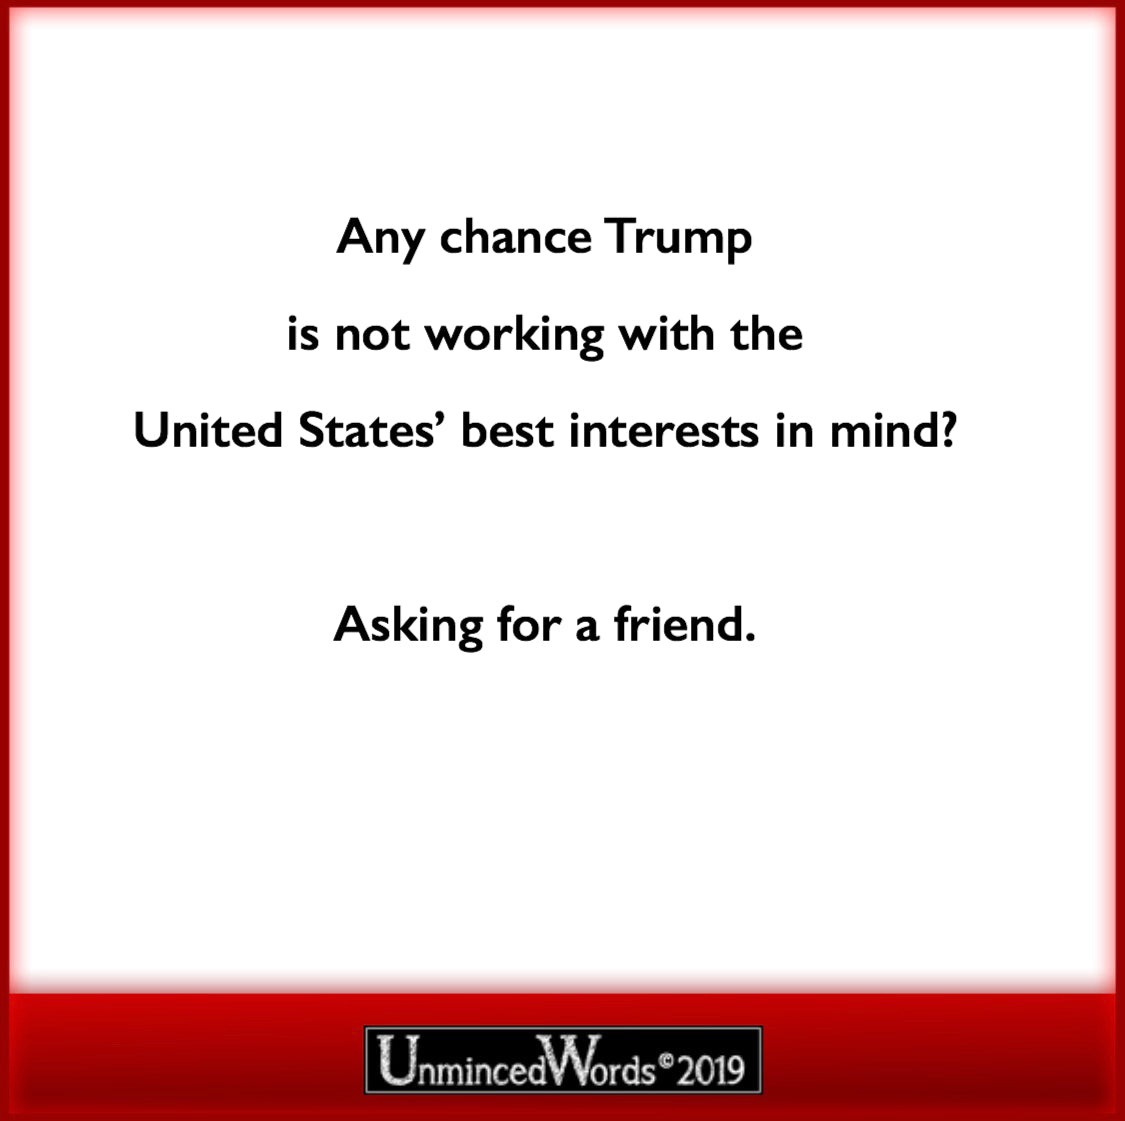 ‪Any chance Trump is not working with the United States’ best interests in mind?